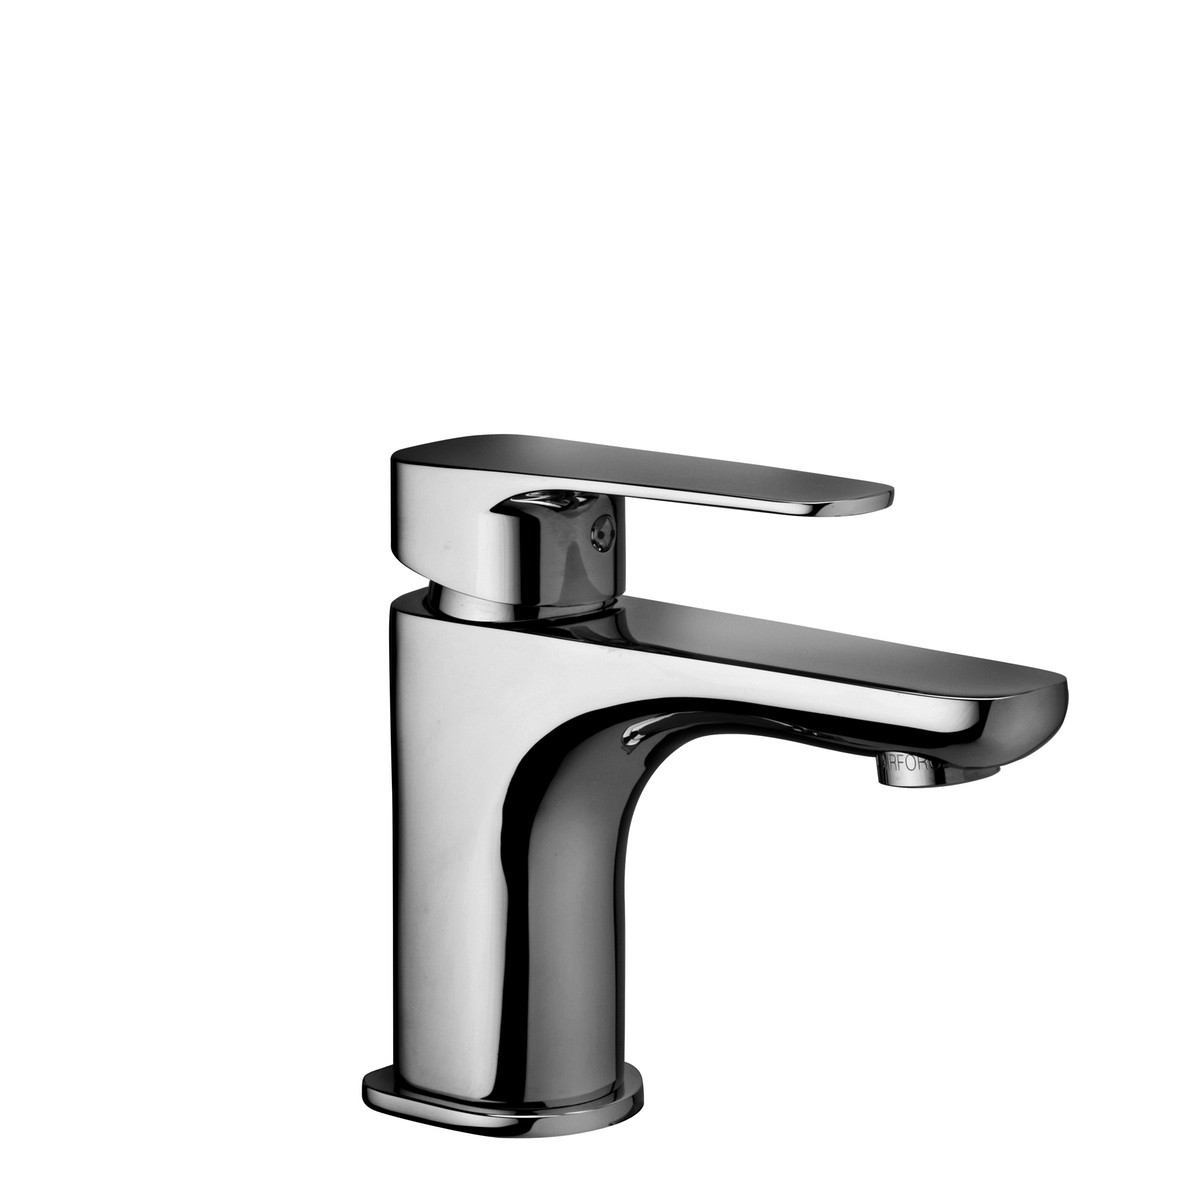 WS Bath Collections Sly SY 071 Single Lever Bathroom Faucet